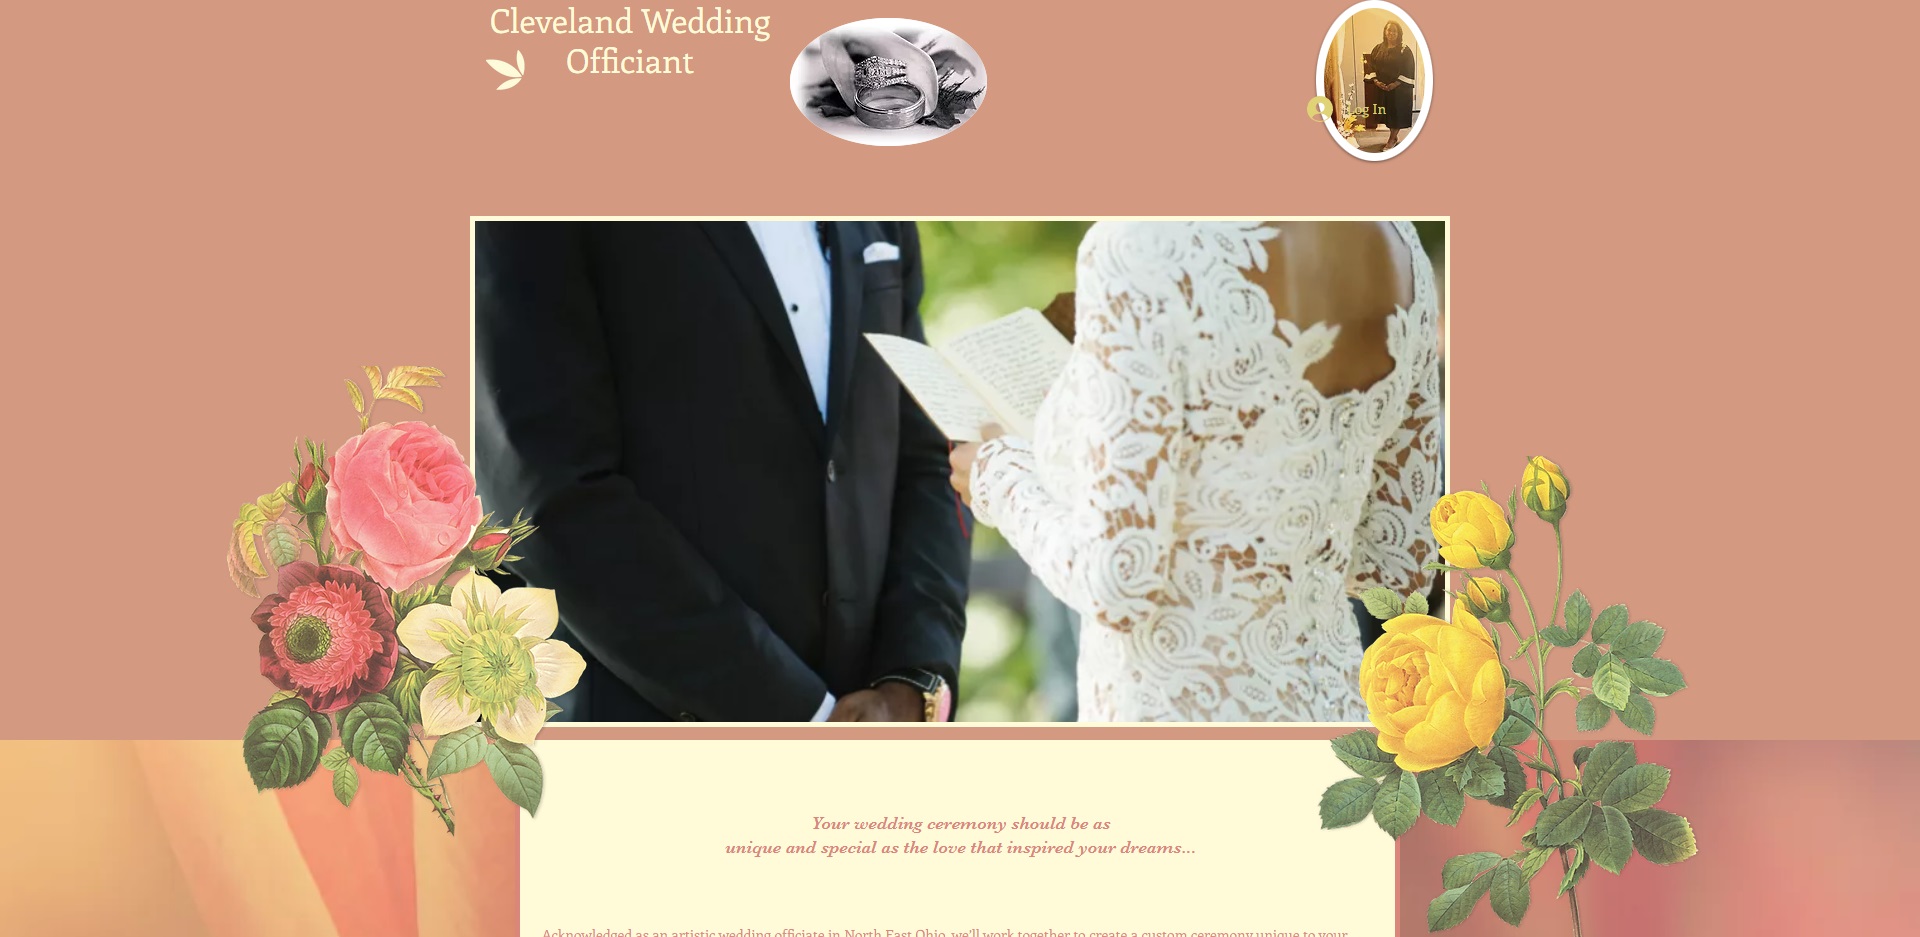 The Best Marriage Celebrants in Cleveland, OH